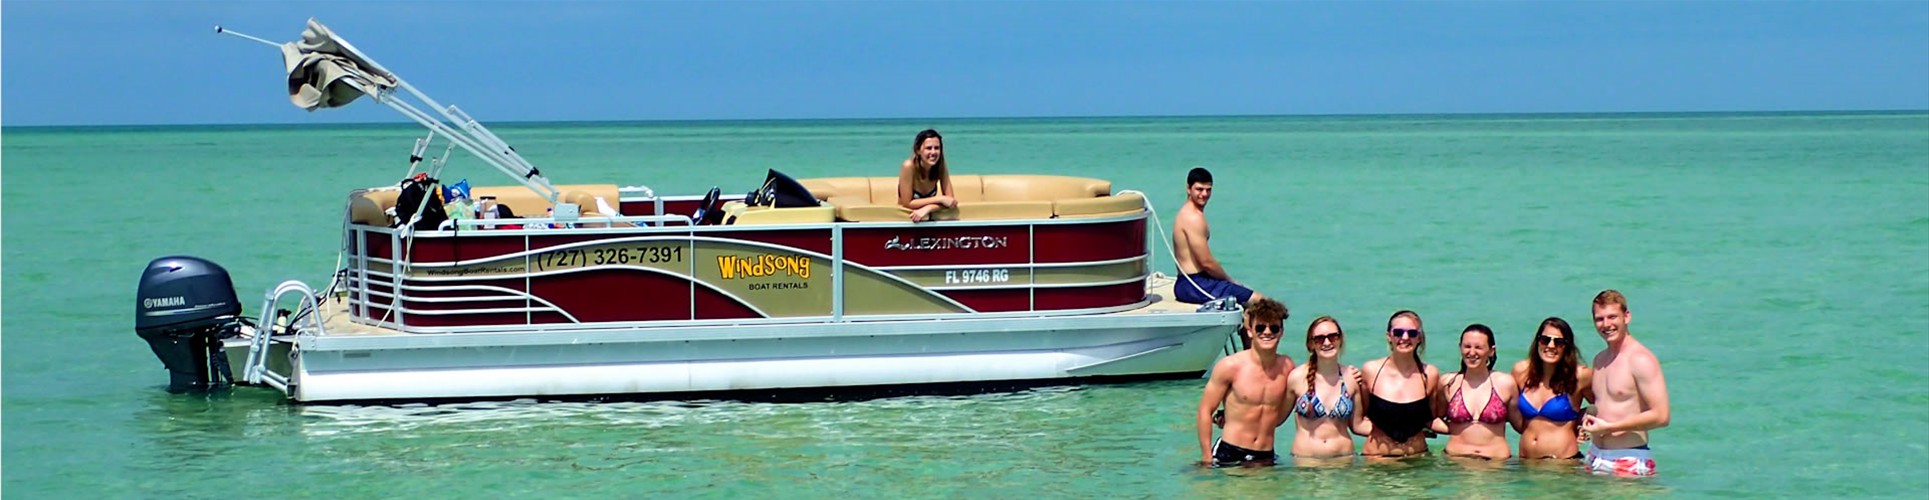 Pontoon Boat Rental Tampa Bay Area, Canoe and Kayak Rentals Pasco County, Tiki Bar Booze Cruise Clearwater and St Petersburg, Florida, Best Pontoon Boat  Rental St Pete Beach